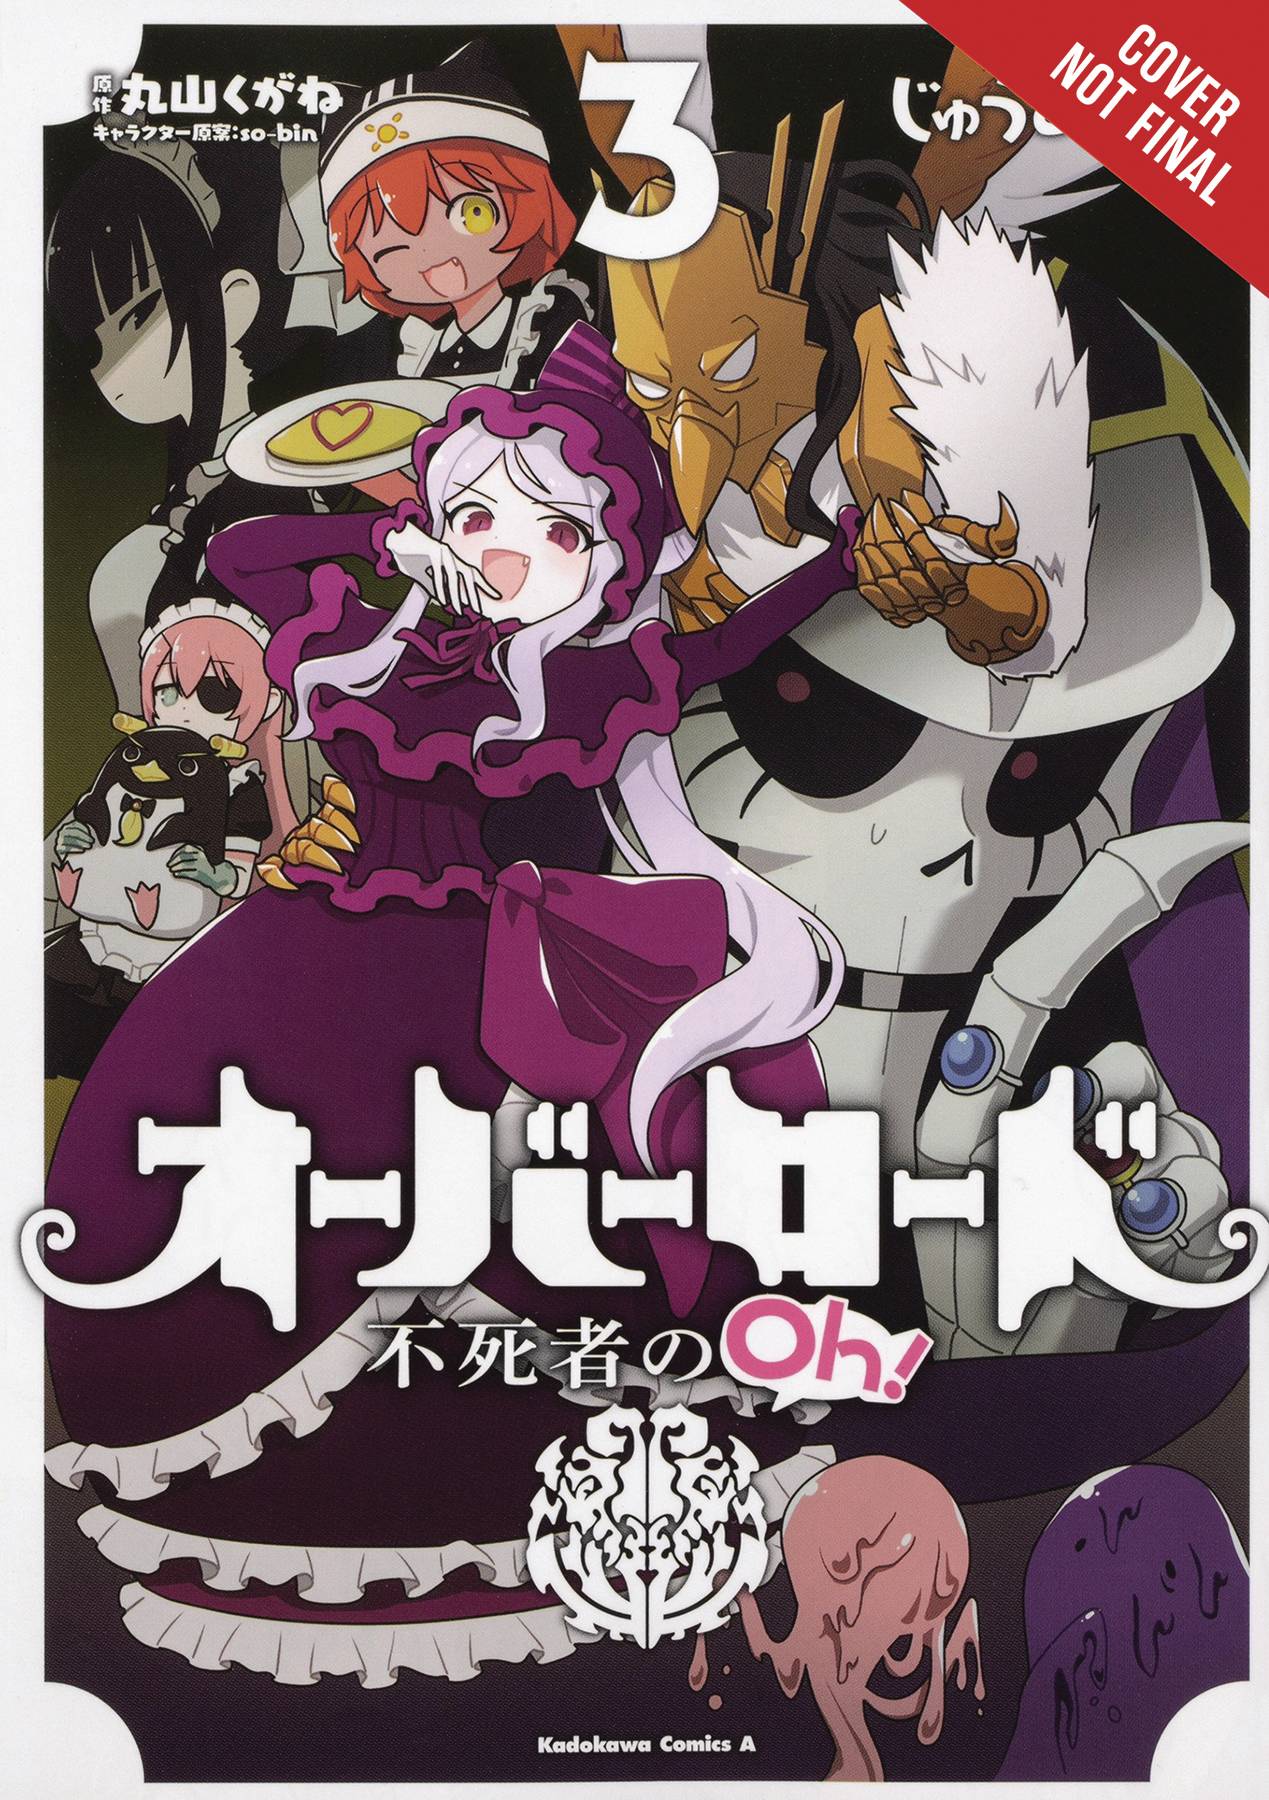 Overlord Undead King Oh Manga Volume 3